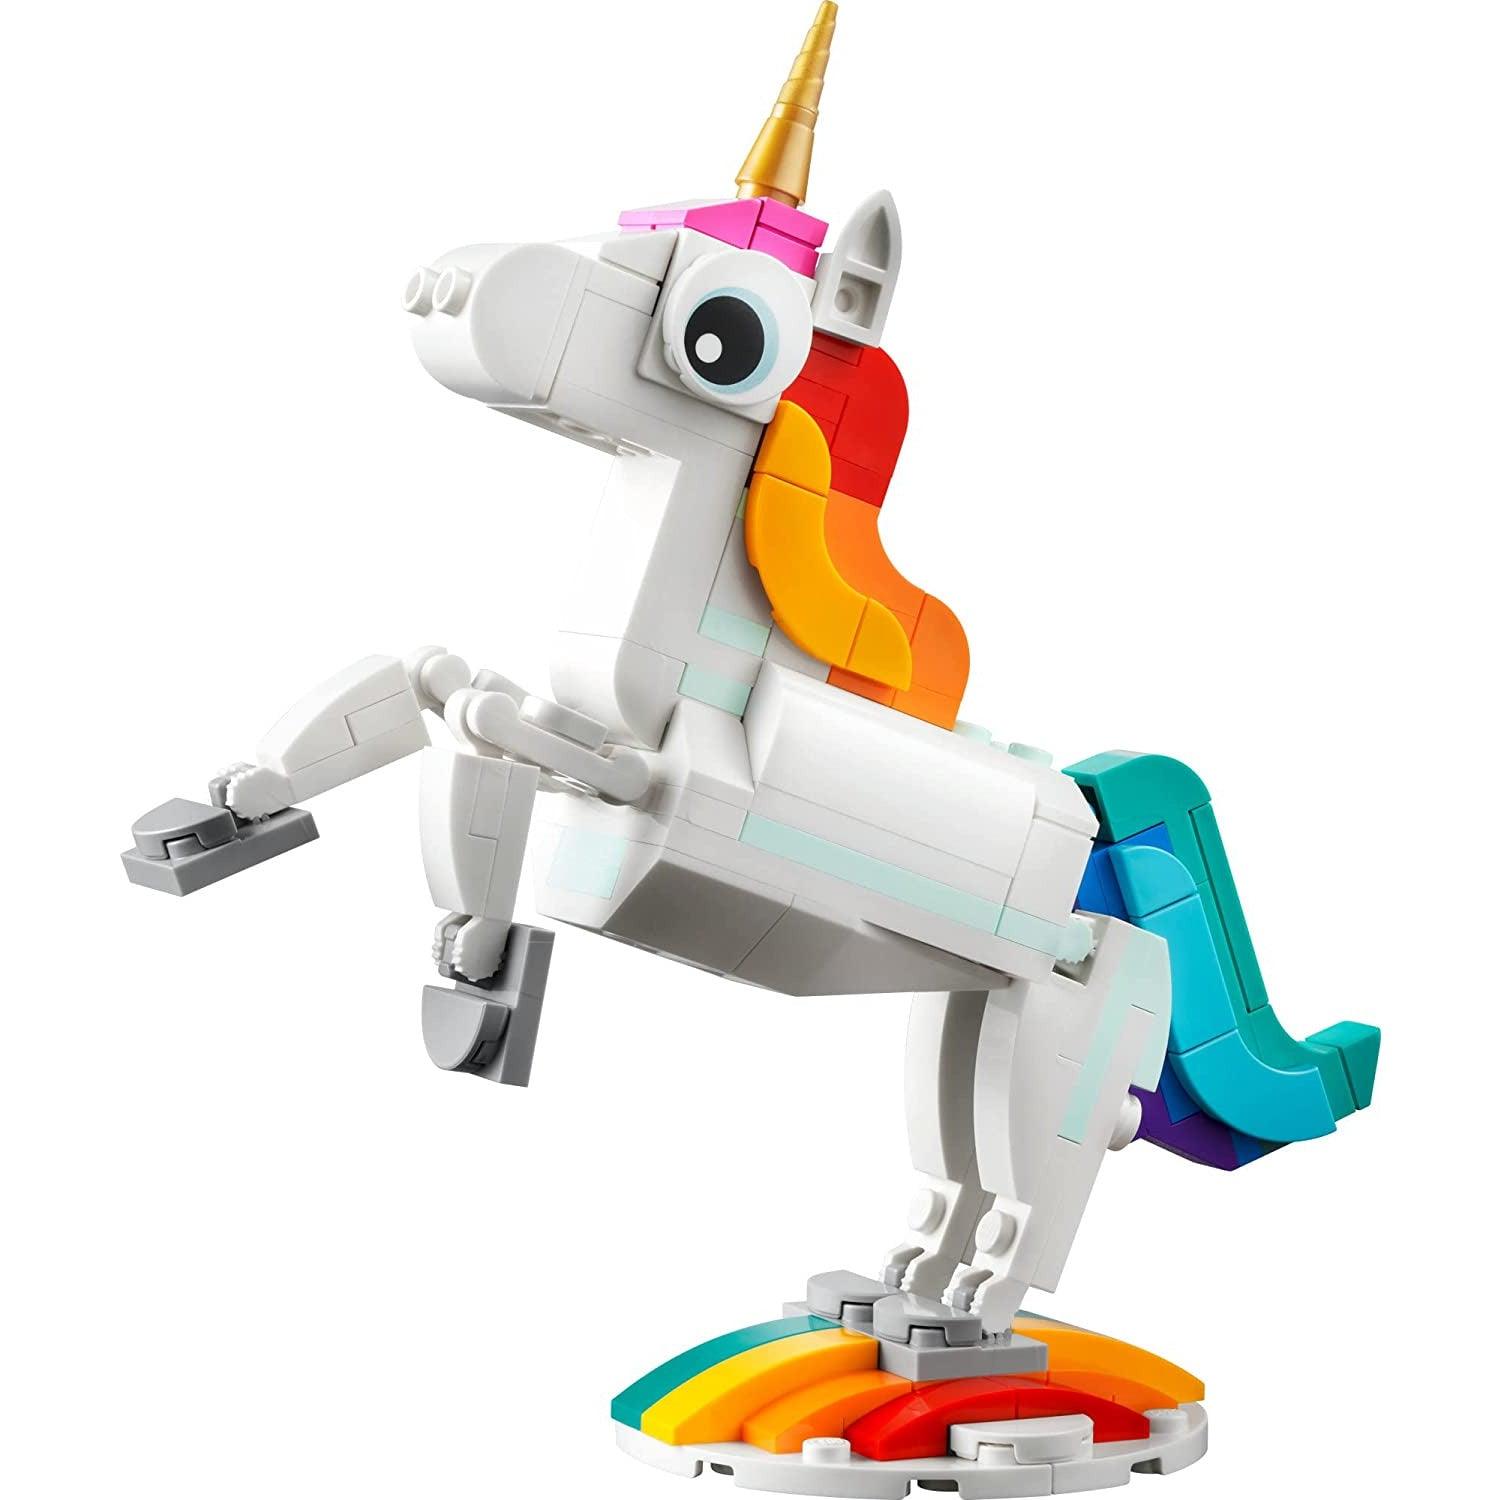 LEGO 31140 Creator 3 in 1 Magical Unicorn Toy to Seahorse to Peacock - BumbleToys - 5-7 Years, Boys, Creator, Creator 3In1, LEGO, OXE, Pre-Order